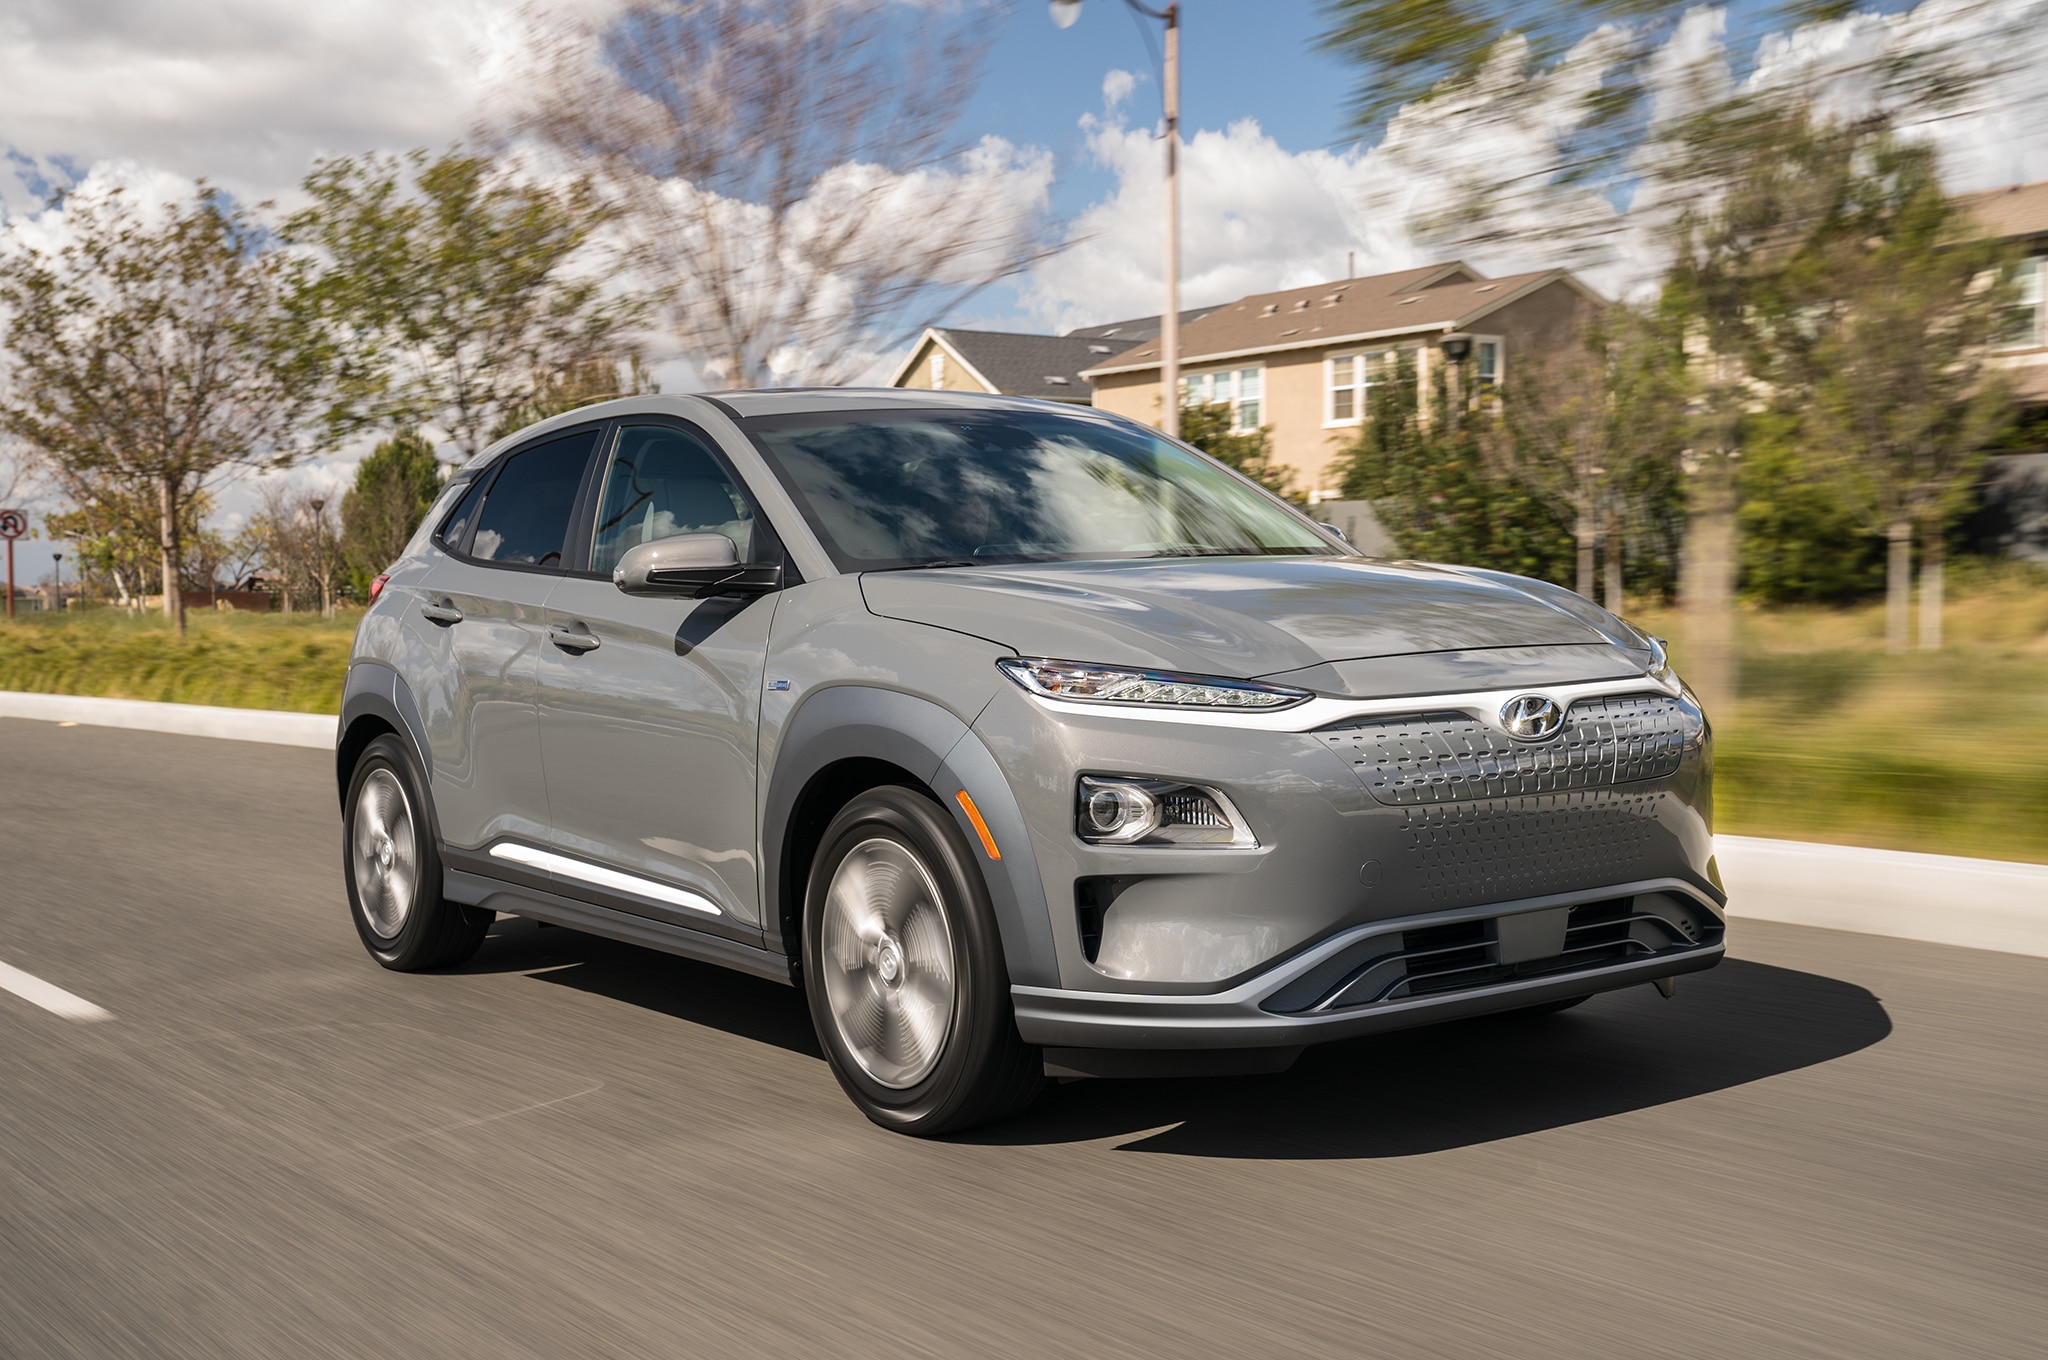 The 2019 Hyundai Kona Electric Is the EV Made Normal